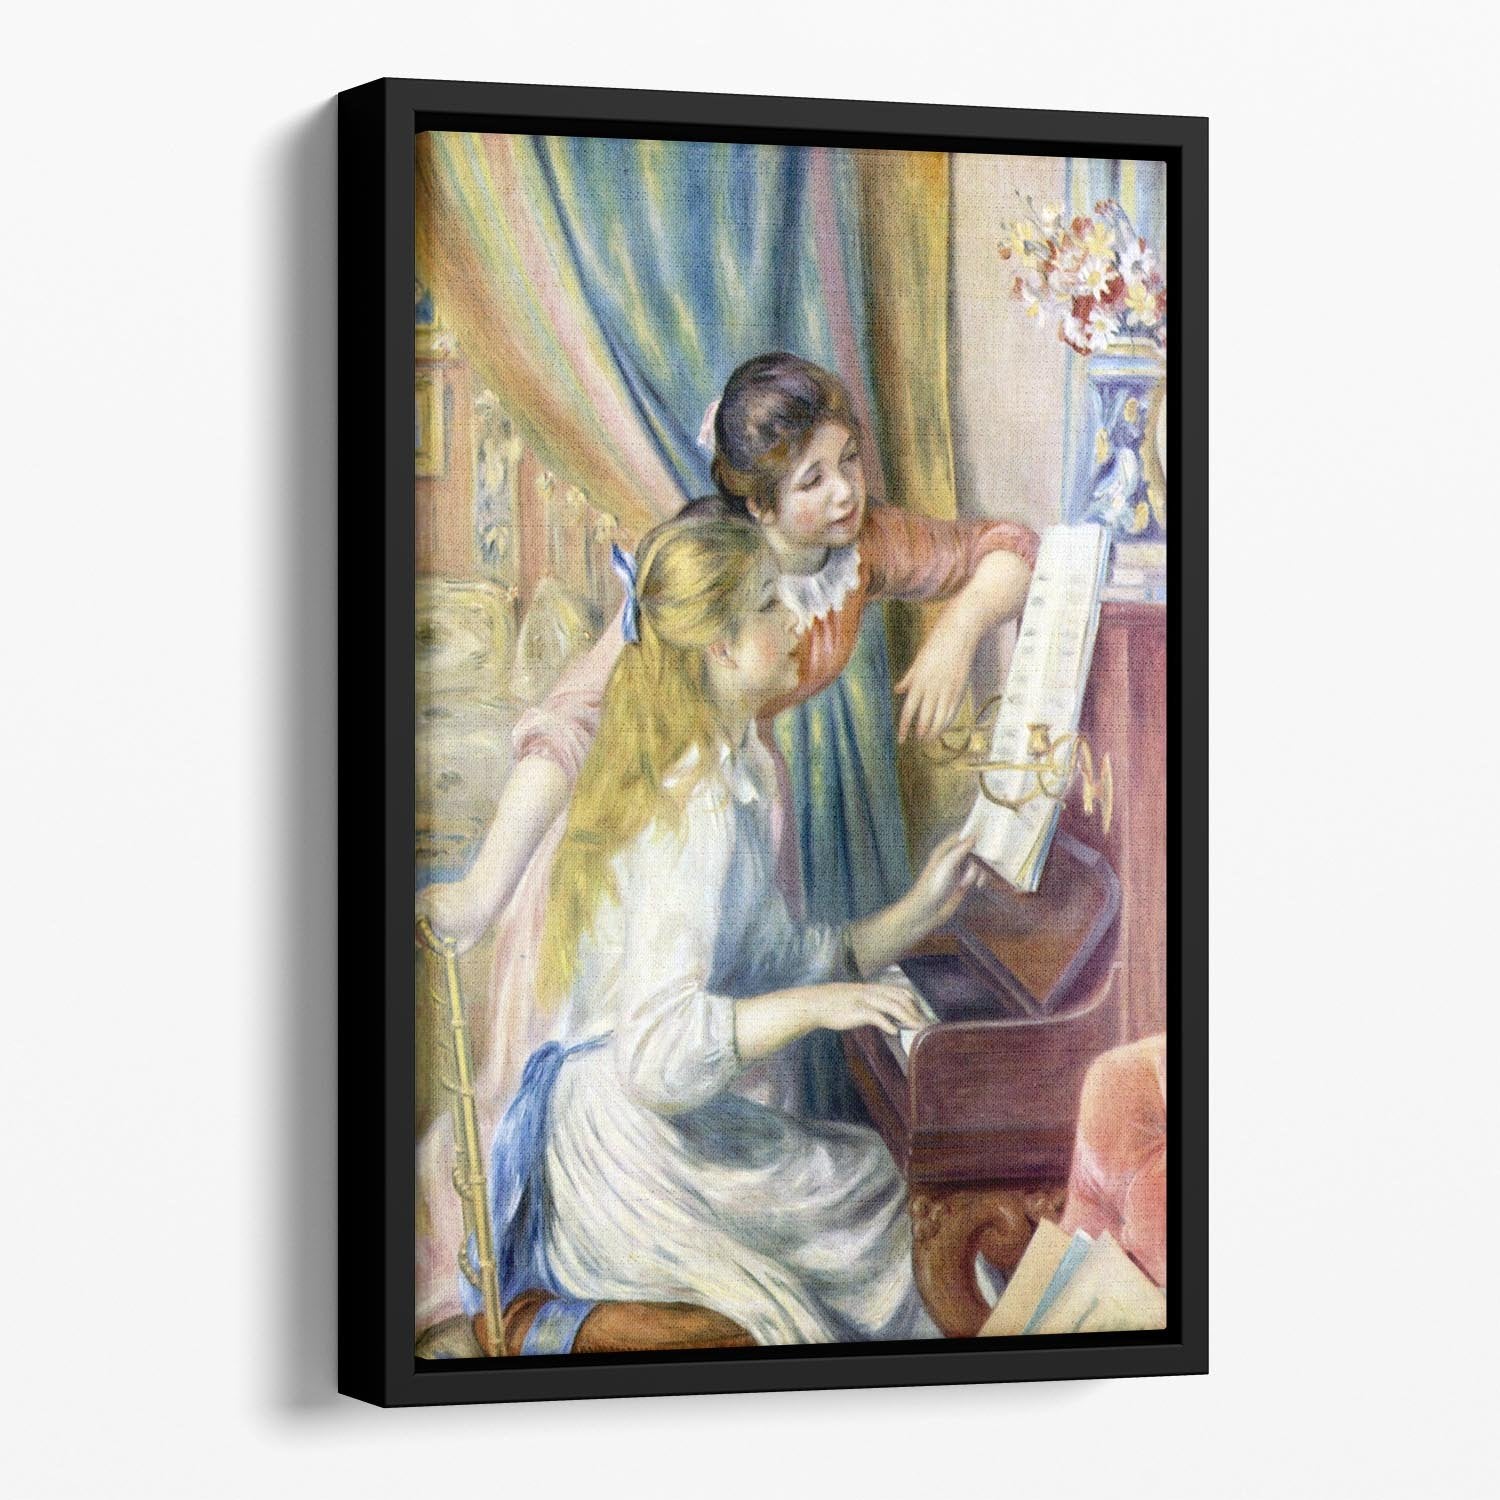 Young girls at the piano 3 by Renoir Floating Framed Canvas